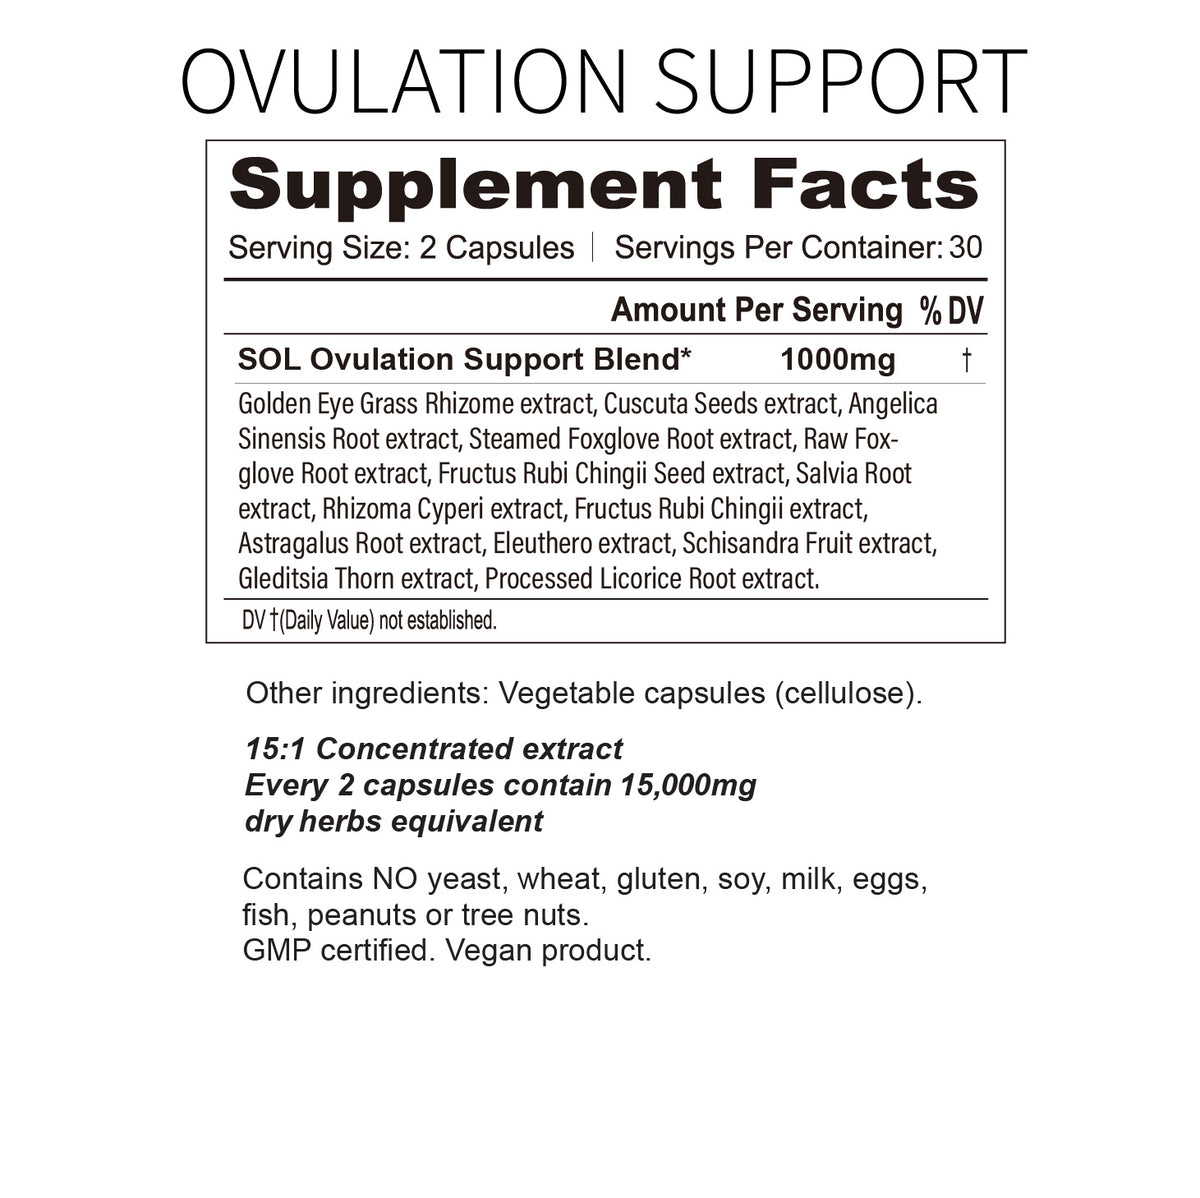 ovulation support supplement facts 